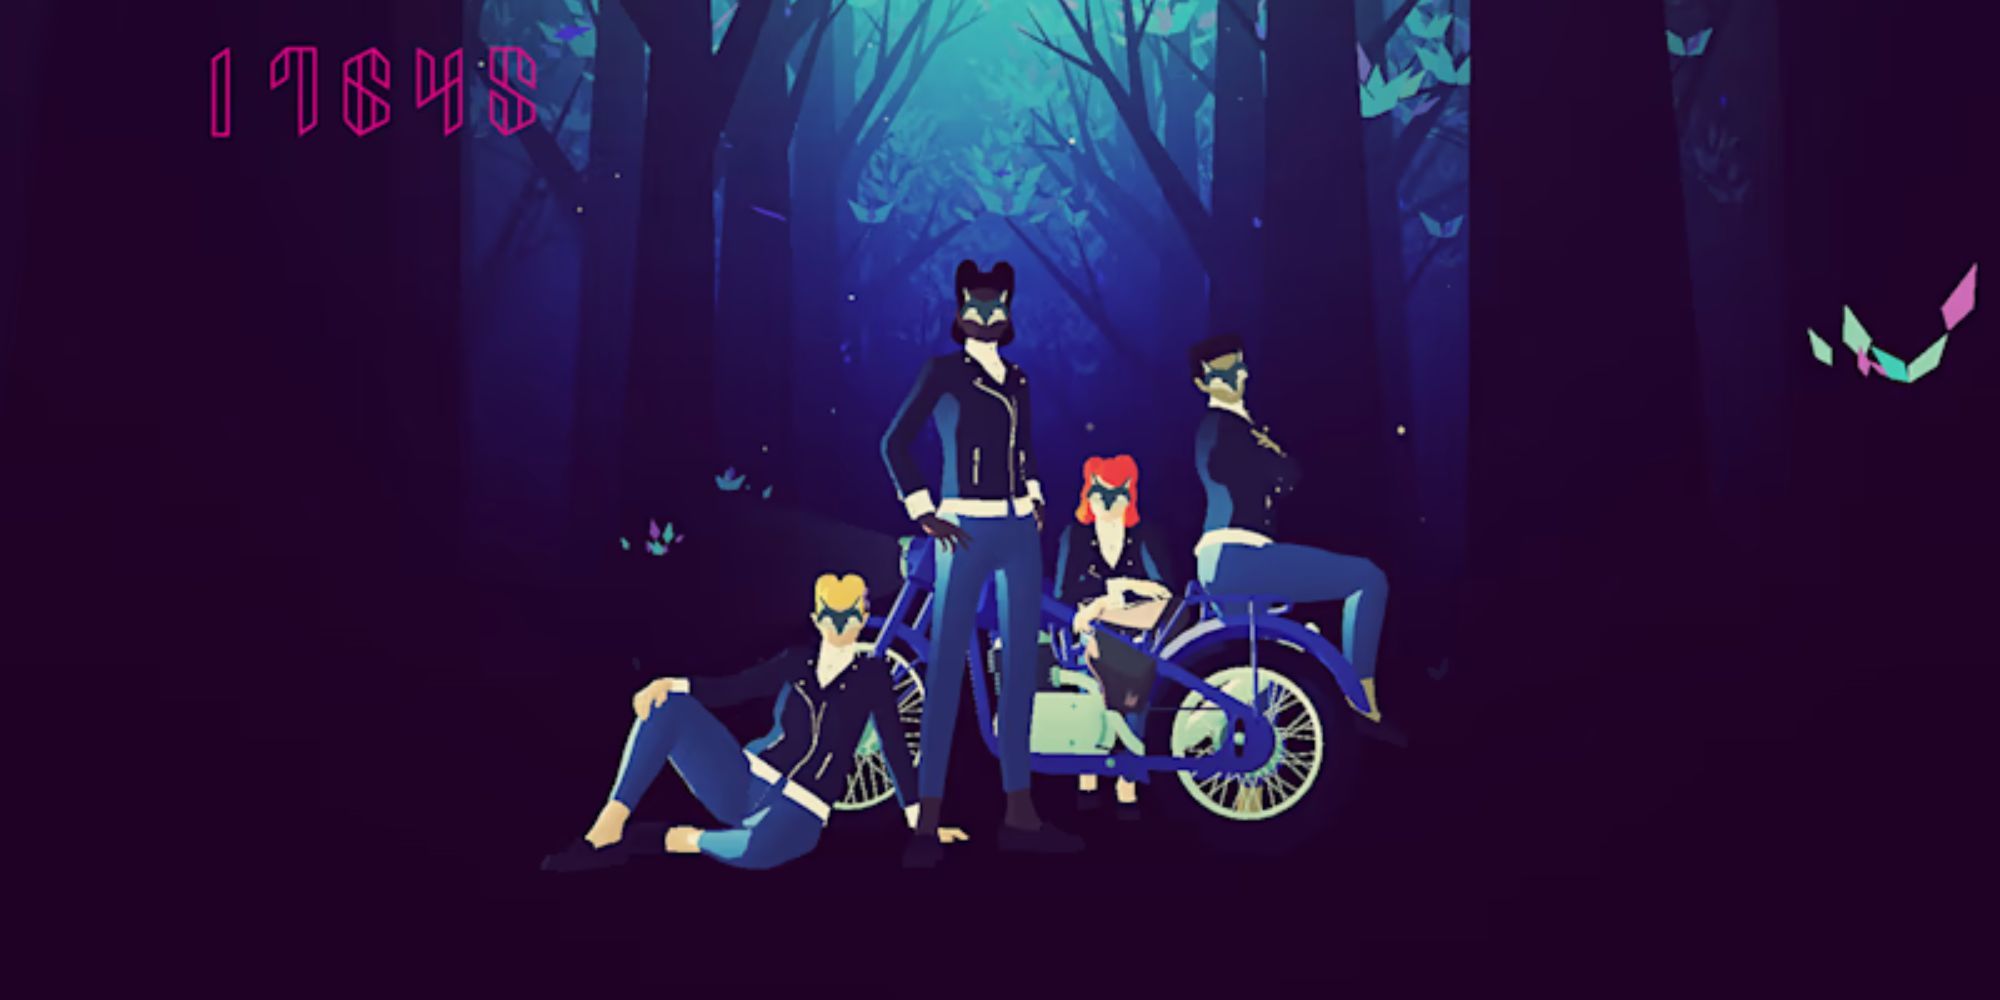 A gang stands near a bike in a forest at night